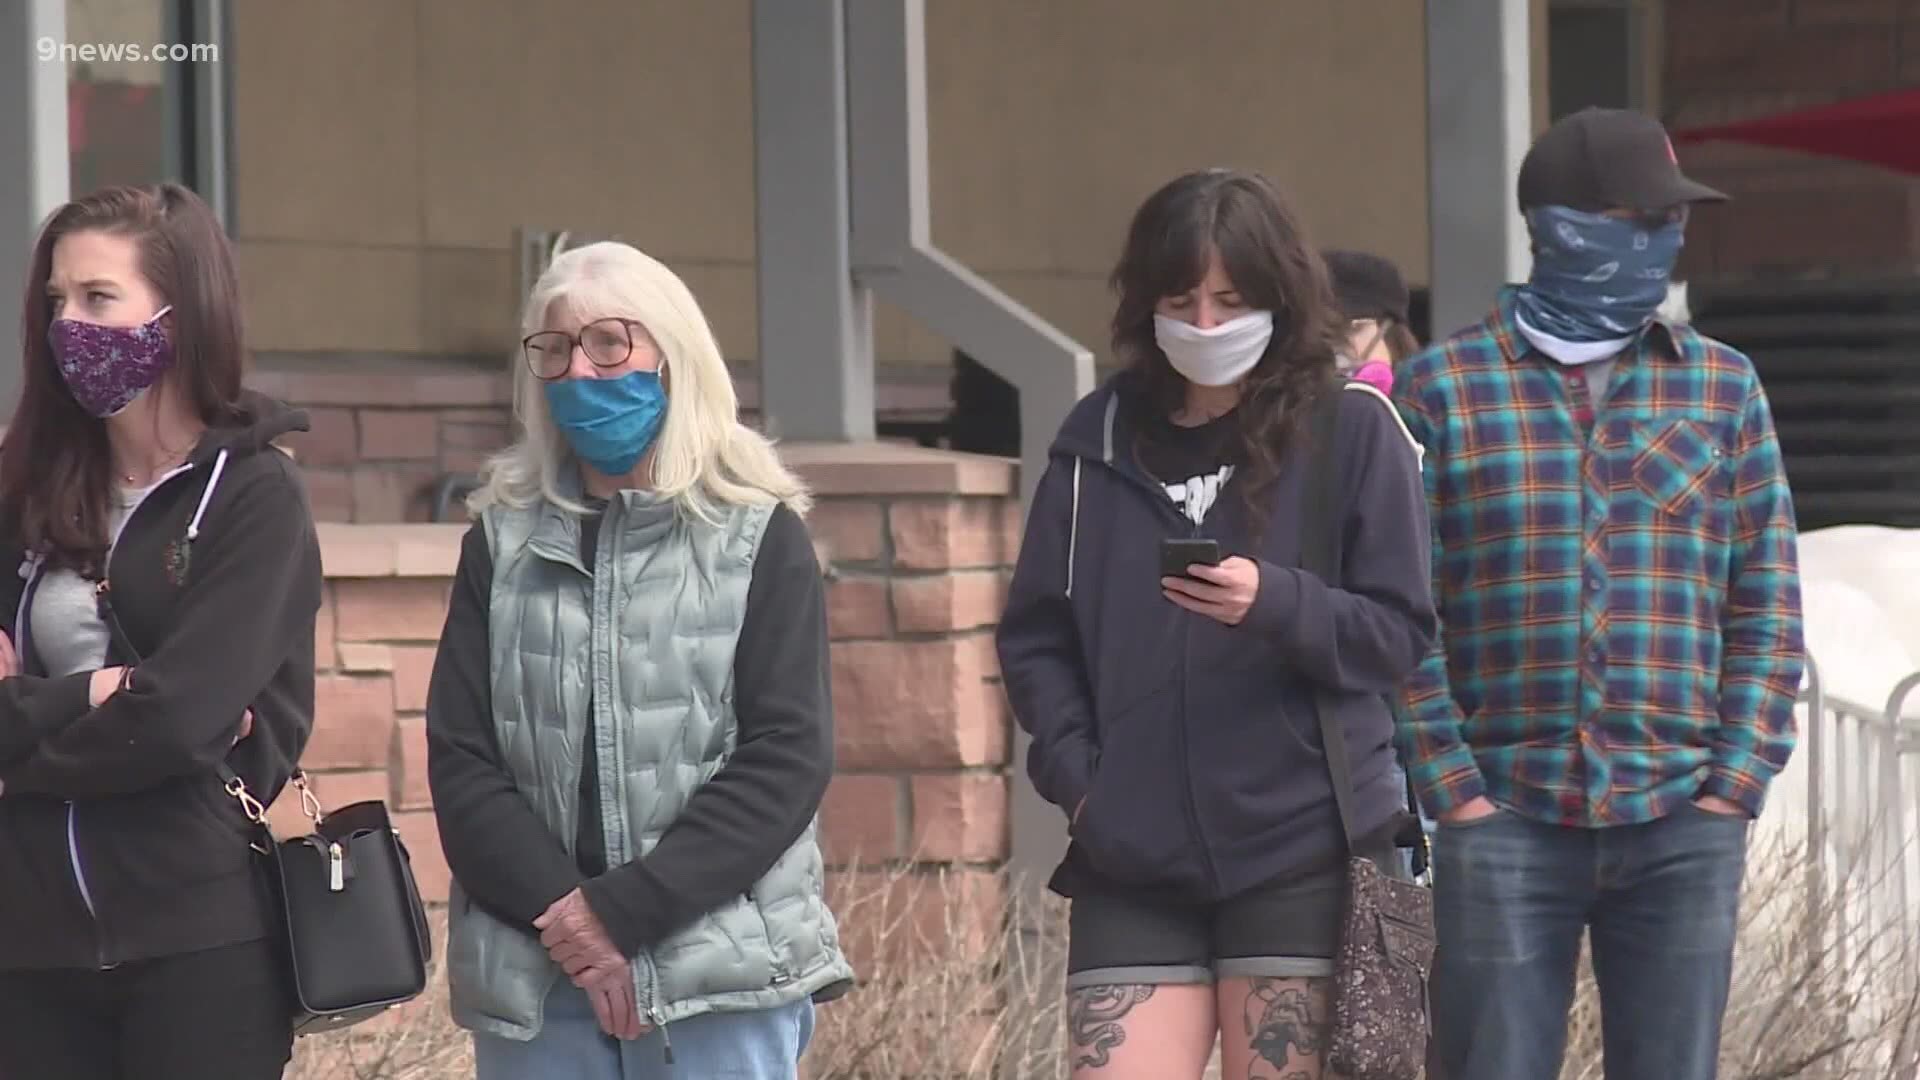 In Colorado, masks are now mandated. Are mask mandates constitutional? 9NEWS Legal Analyst and Metro State professor Whitney Traylor breaks it down.